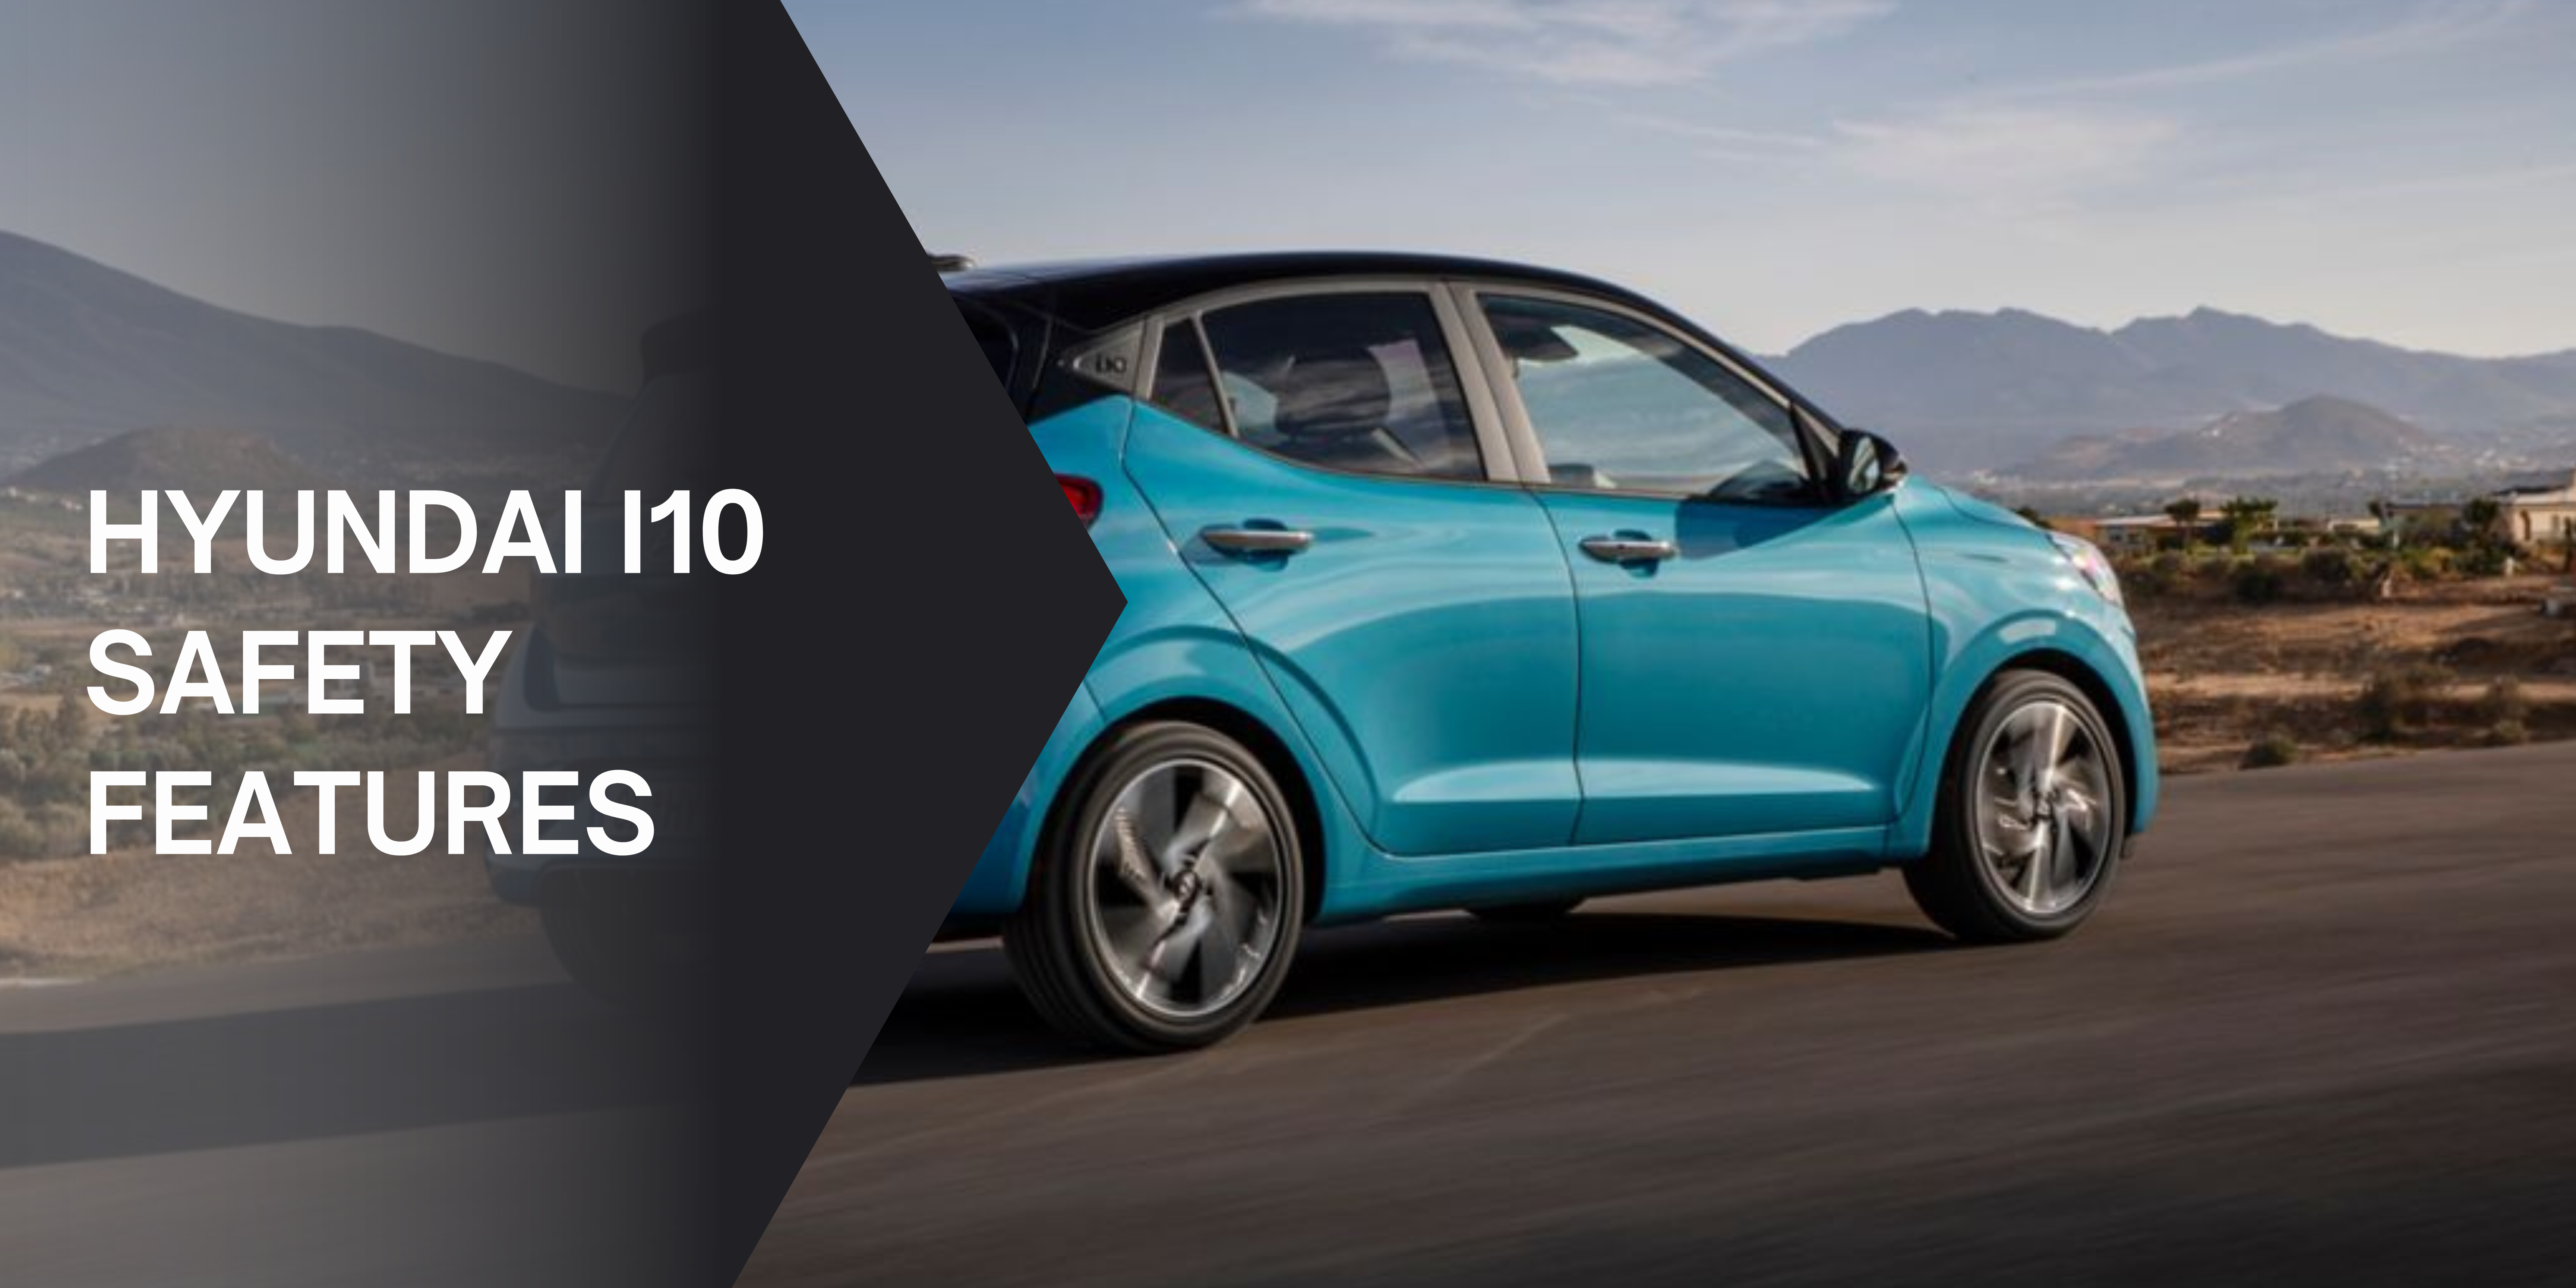 Hyundai i10 Safety Features